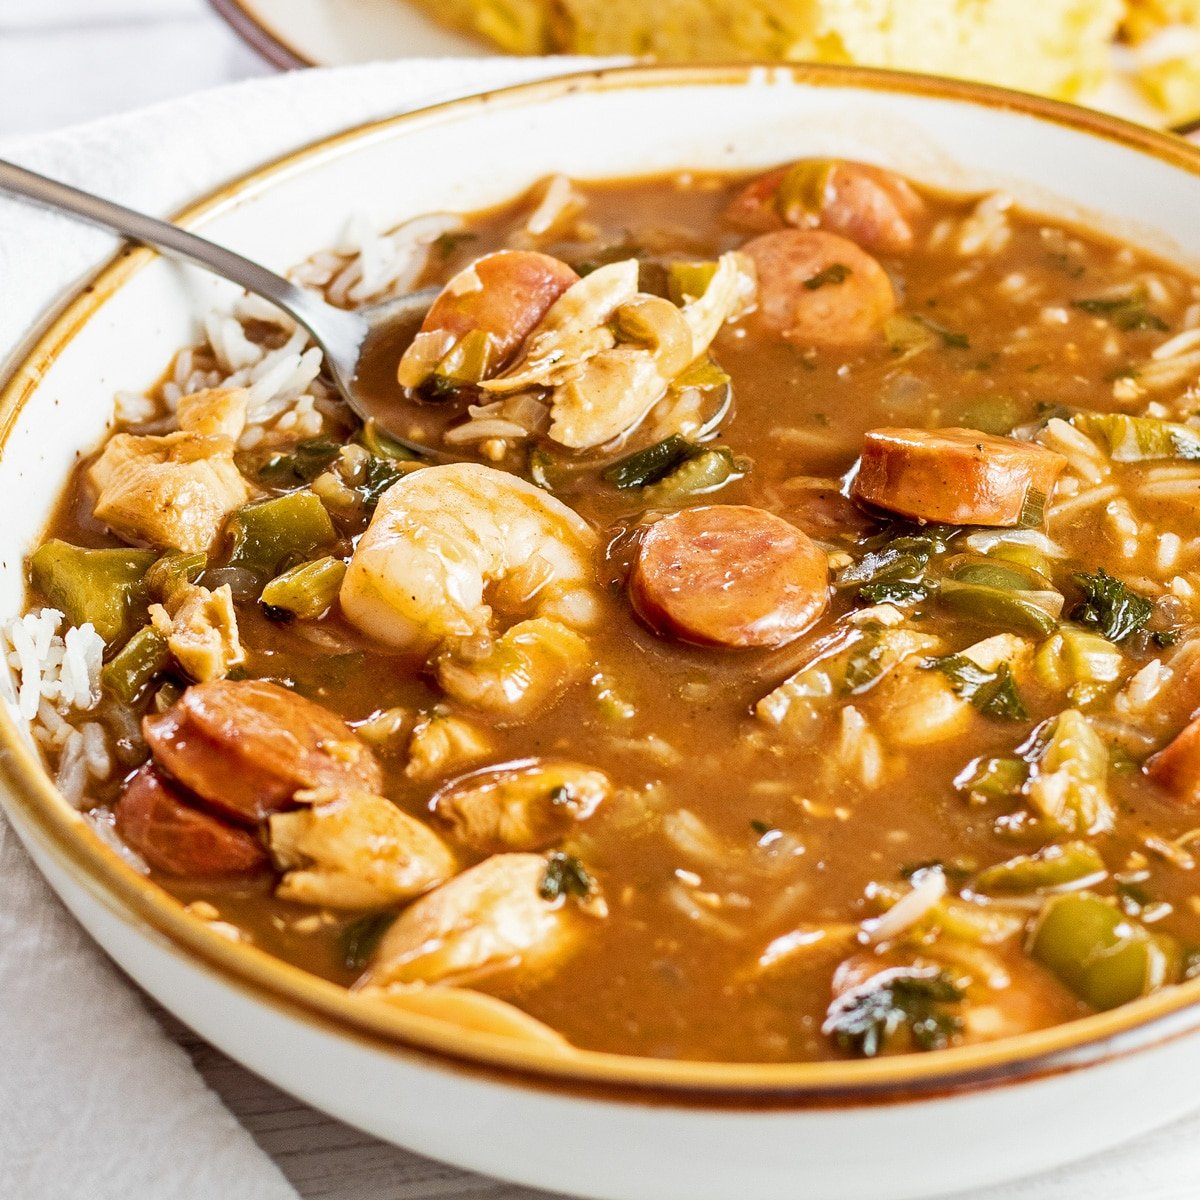 Gumbo Soup With Chicken, Shrimp & Andouille Sausage